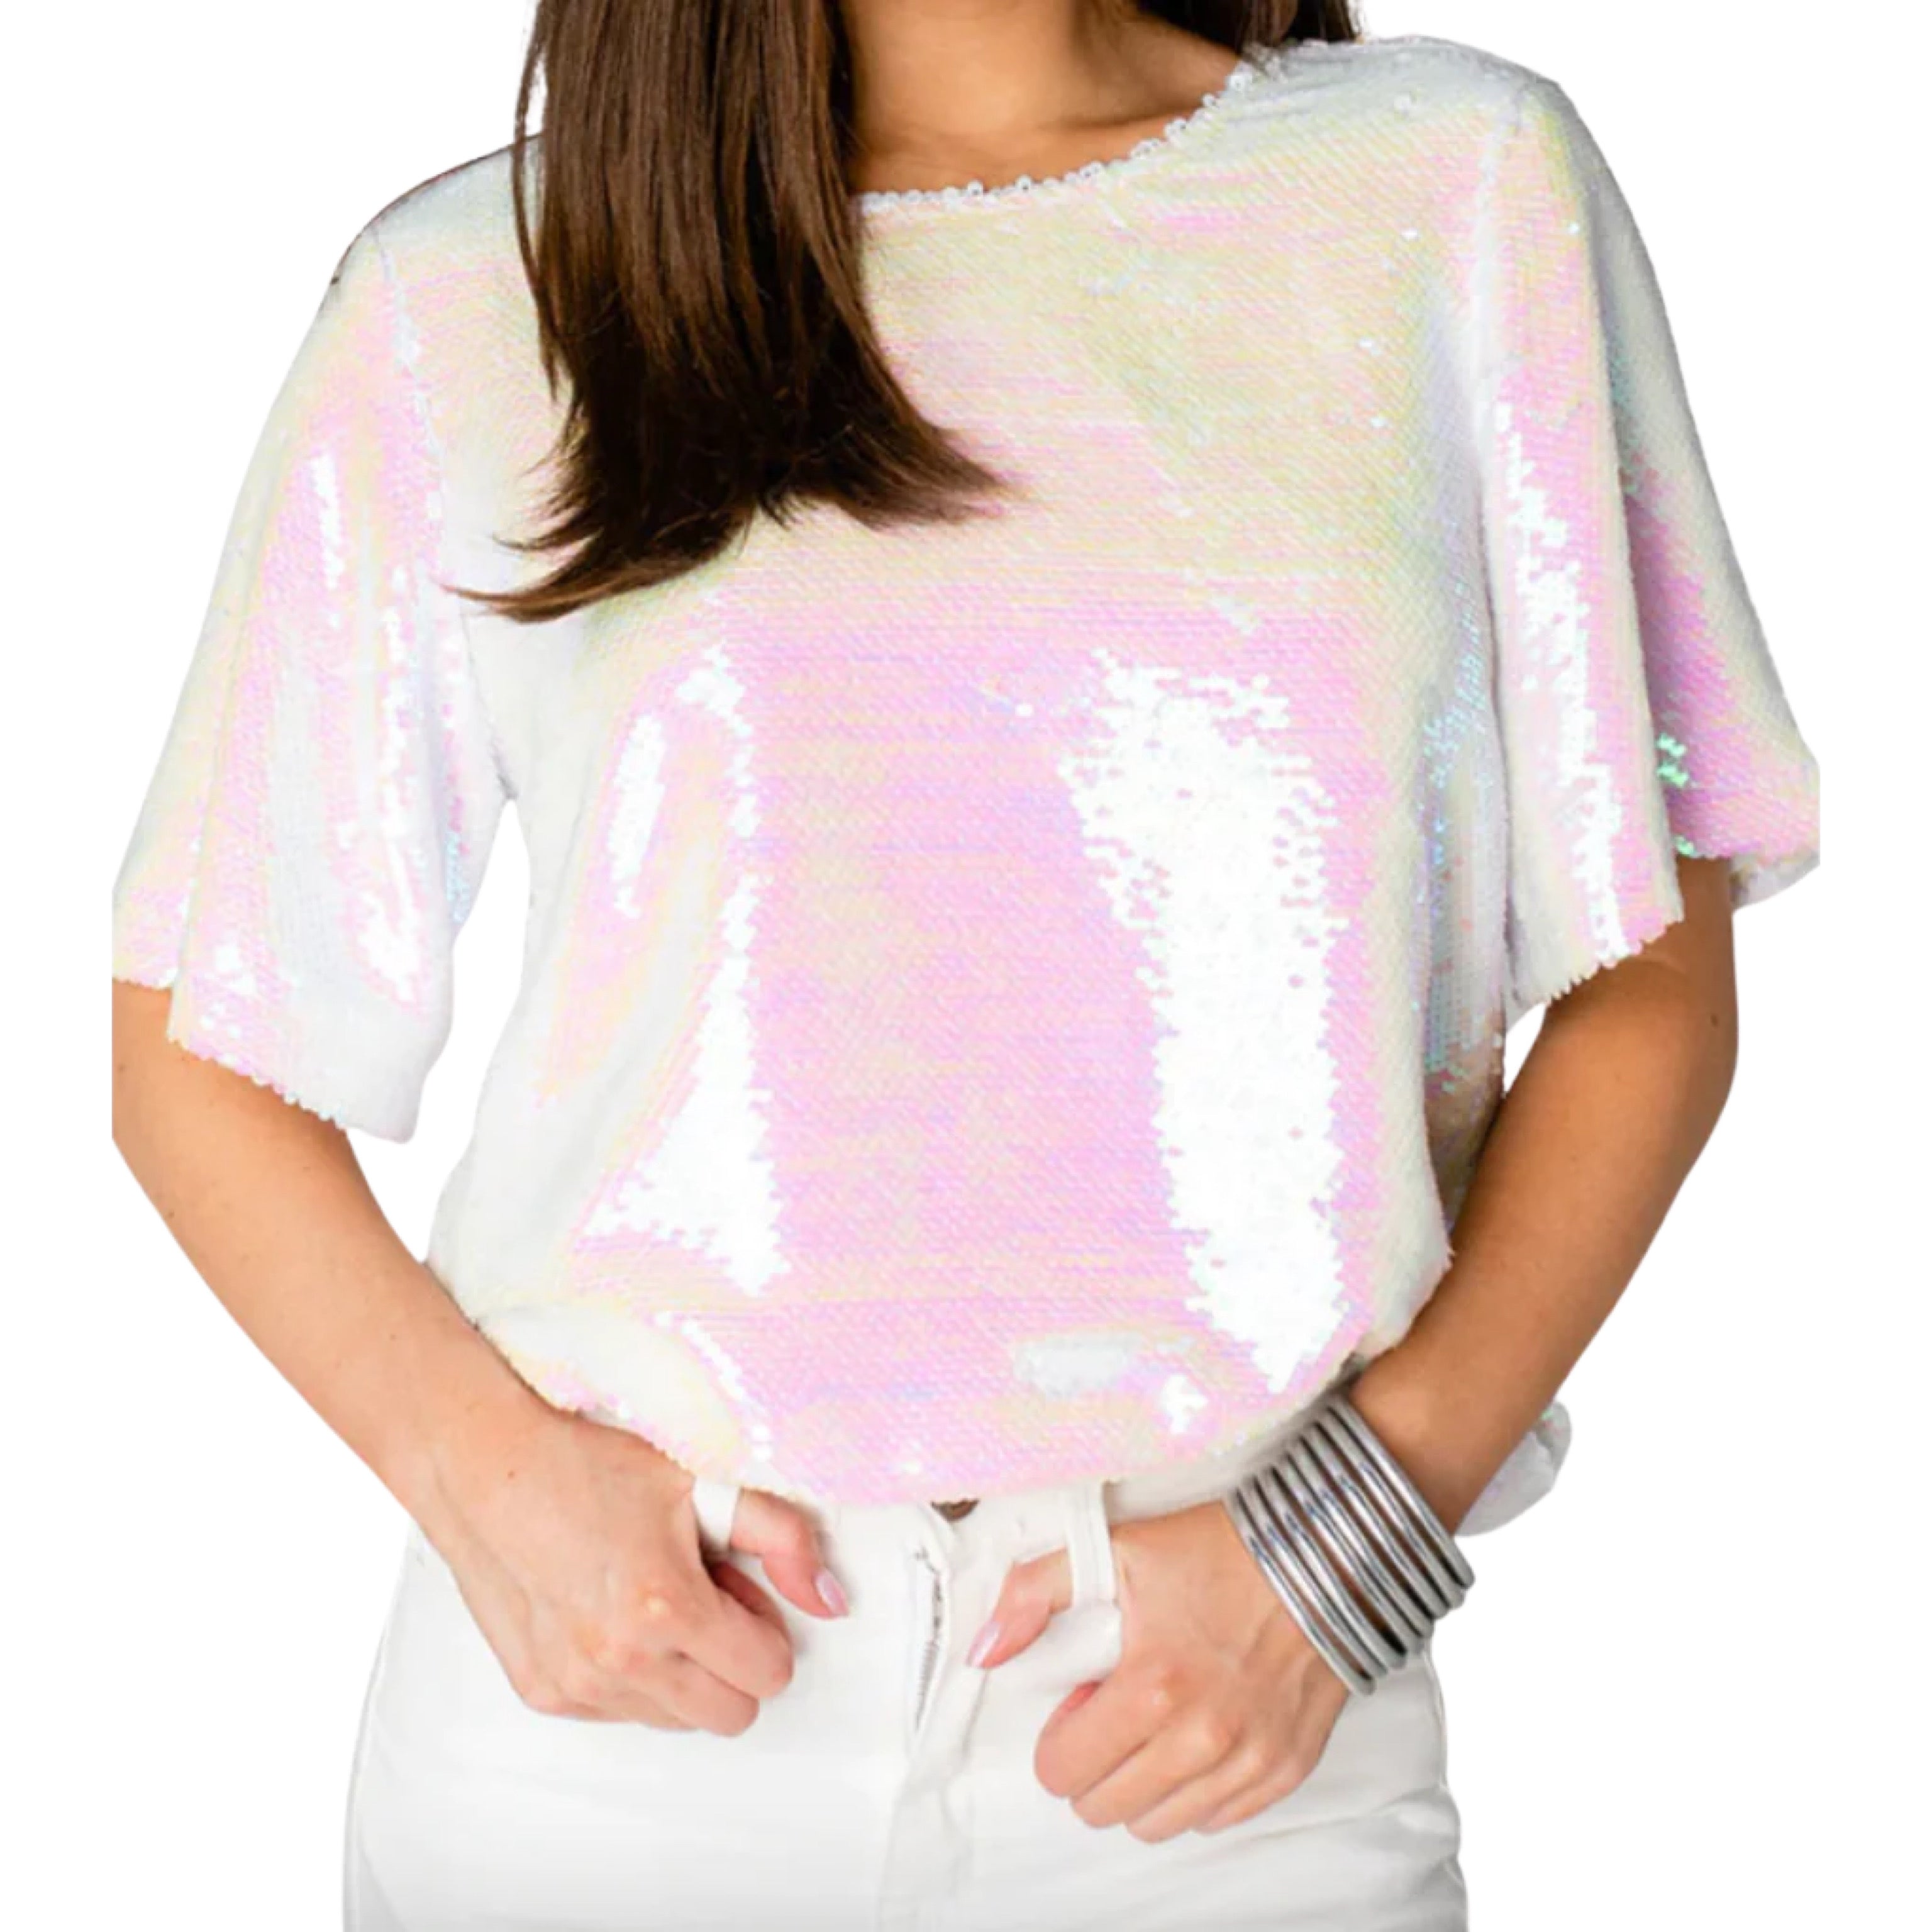 Buddy Love iridescent sequin blouse, size S